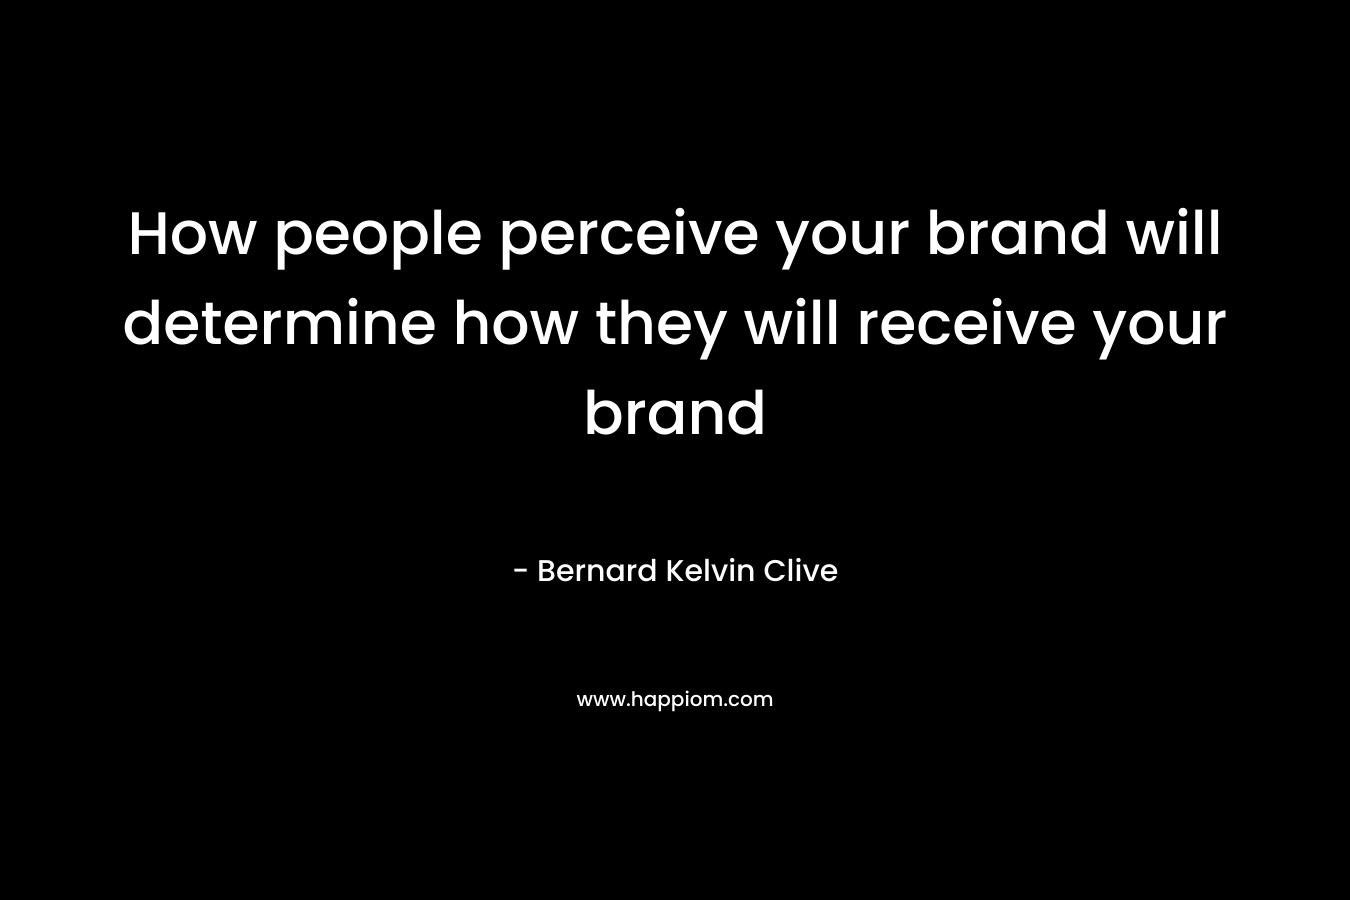 How people perceive your brand will determine how they will receive your brand